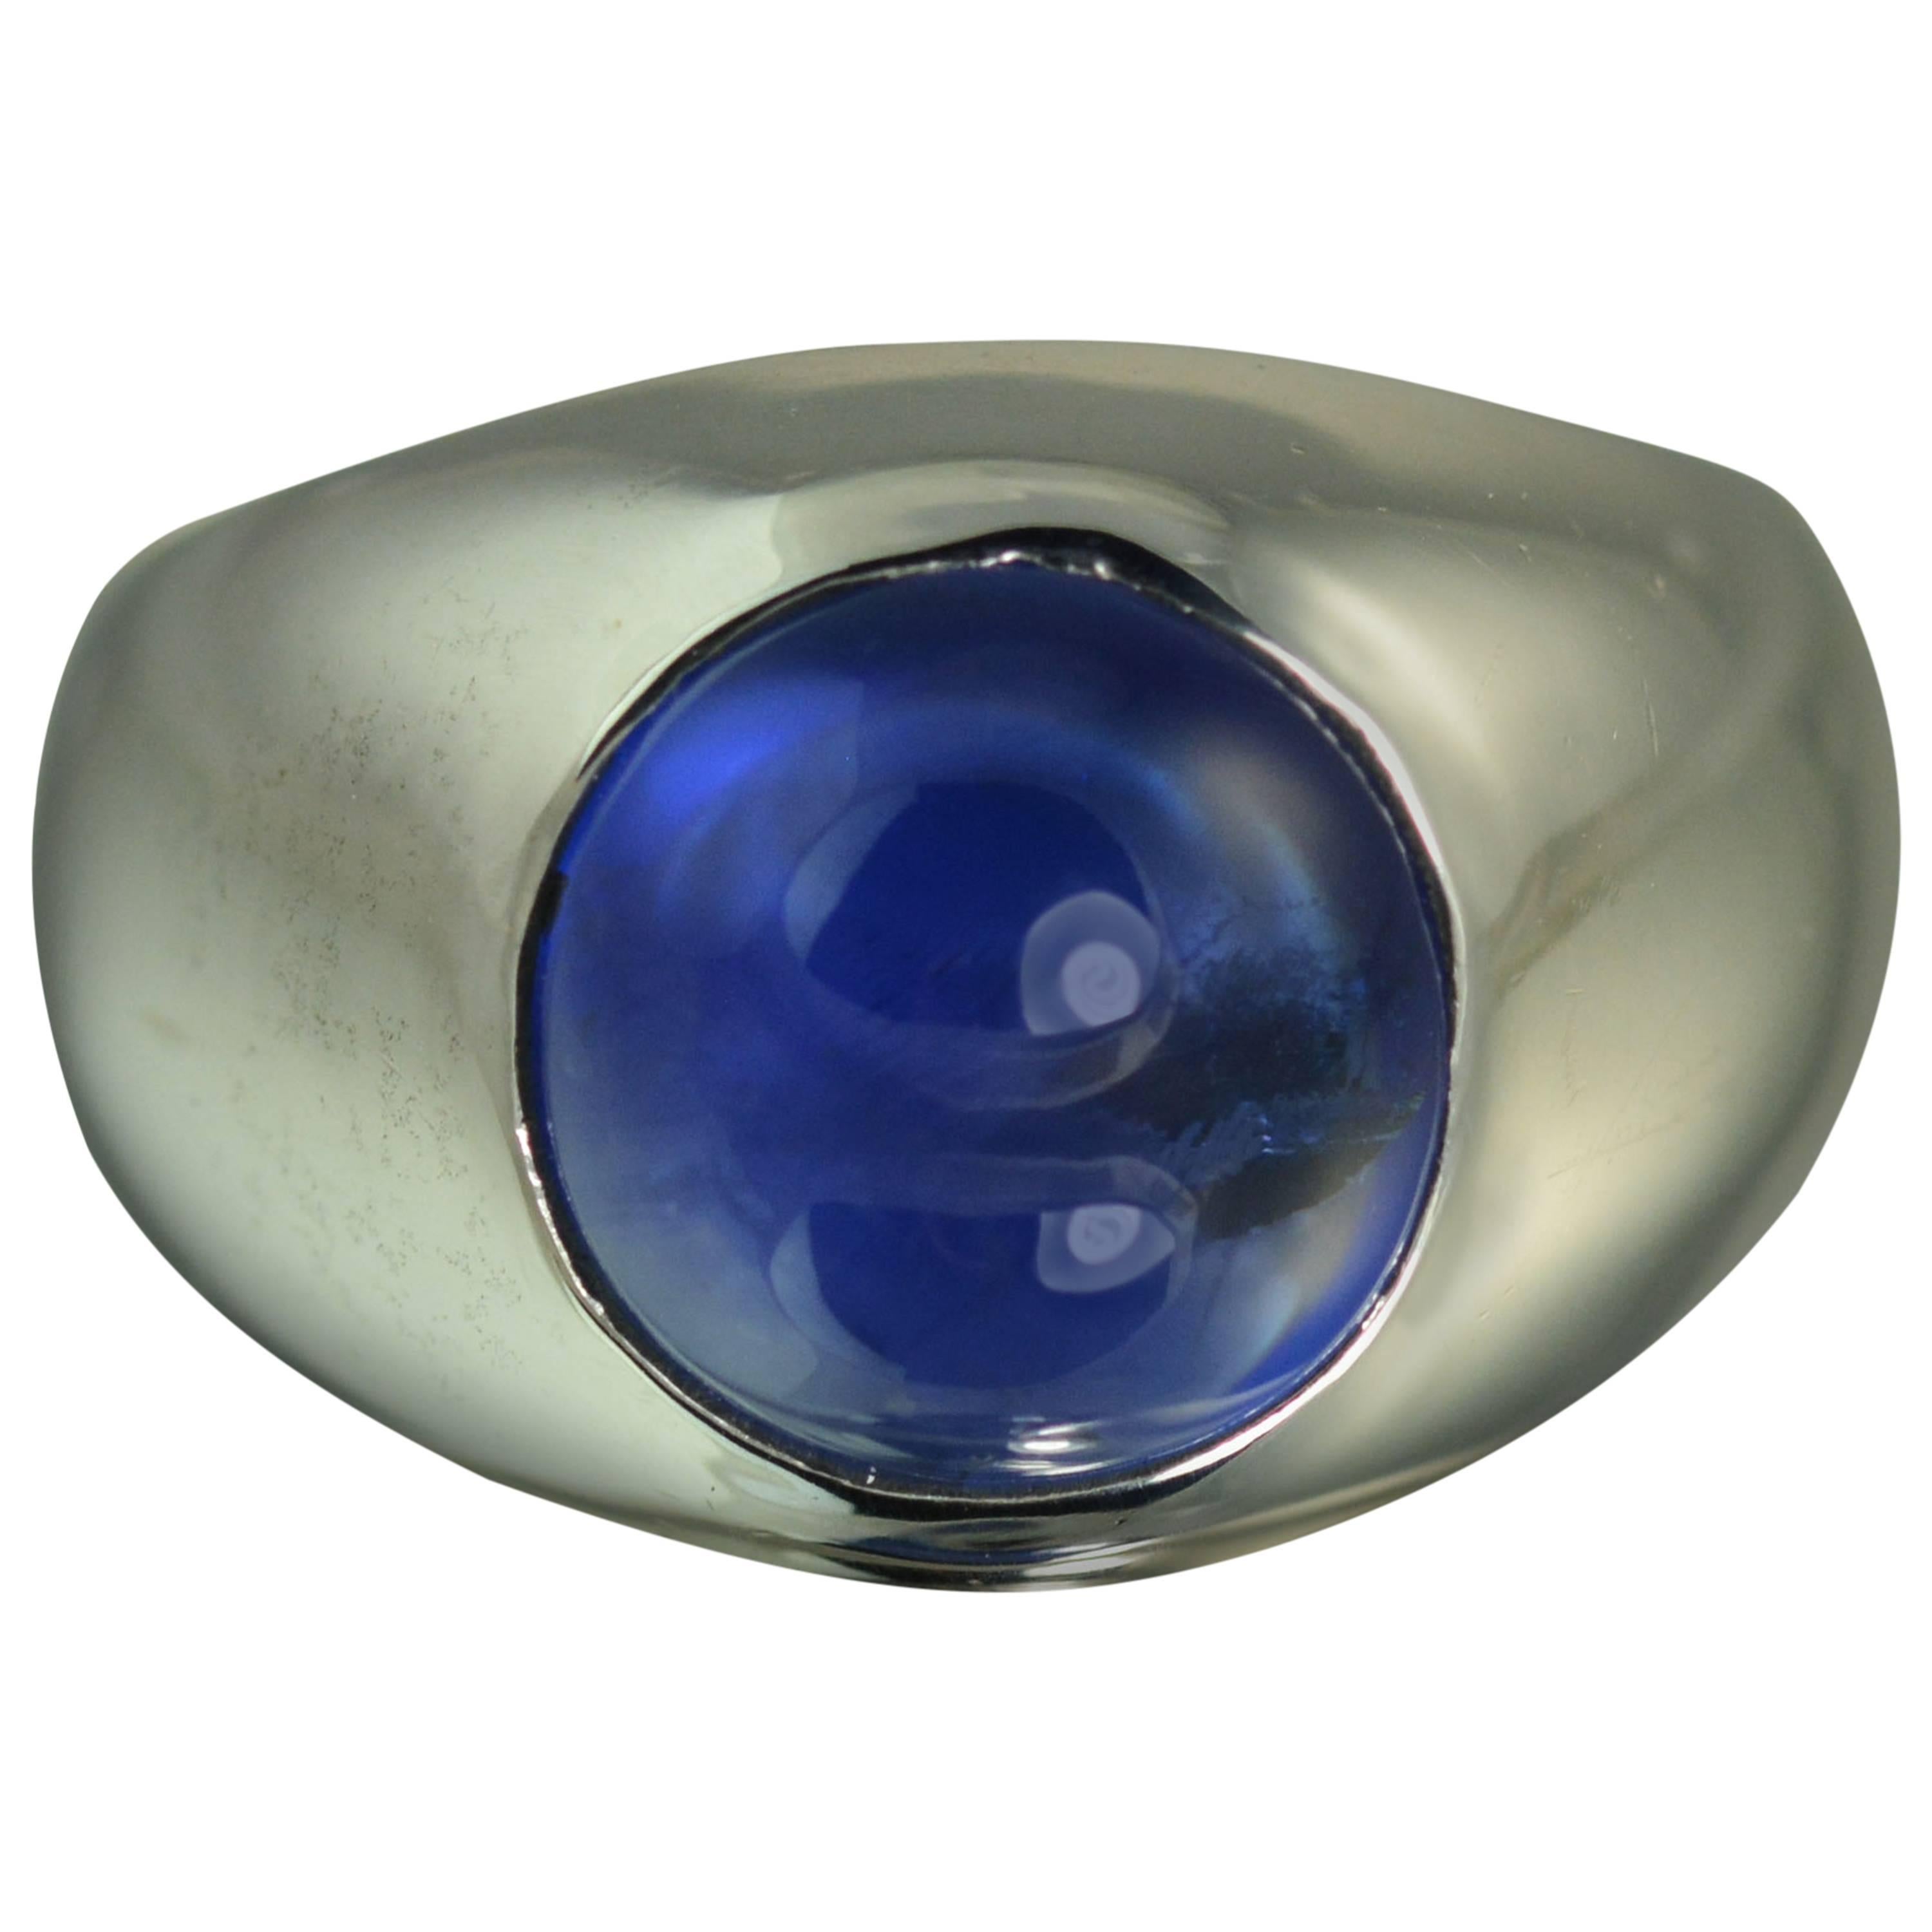  6.74 Carat No Heat Sapphire Gold Dome Ring